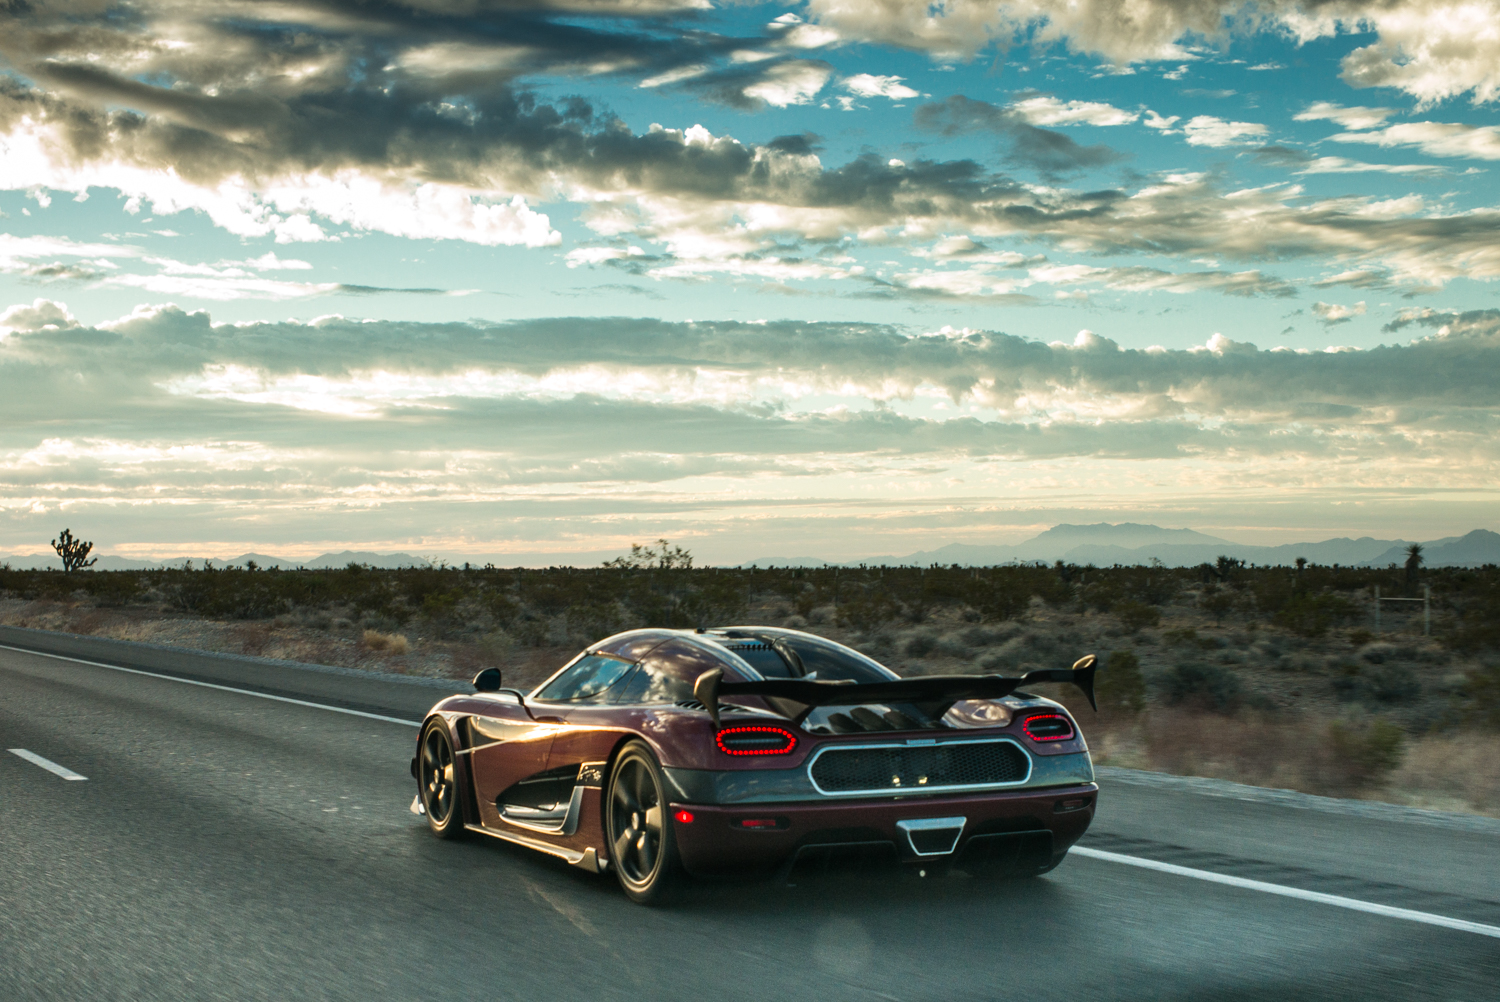 Agera RS in Nevada for Fastest production vehicle title in Nevada 